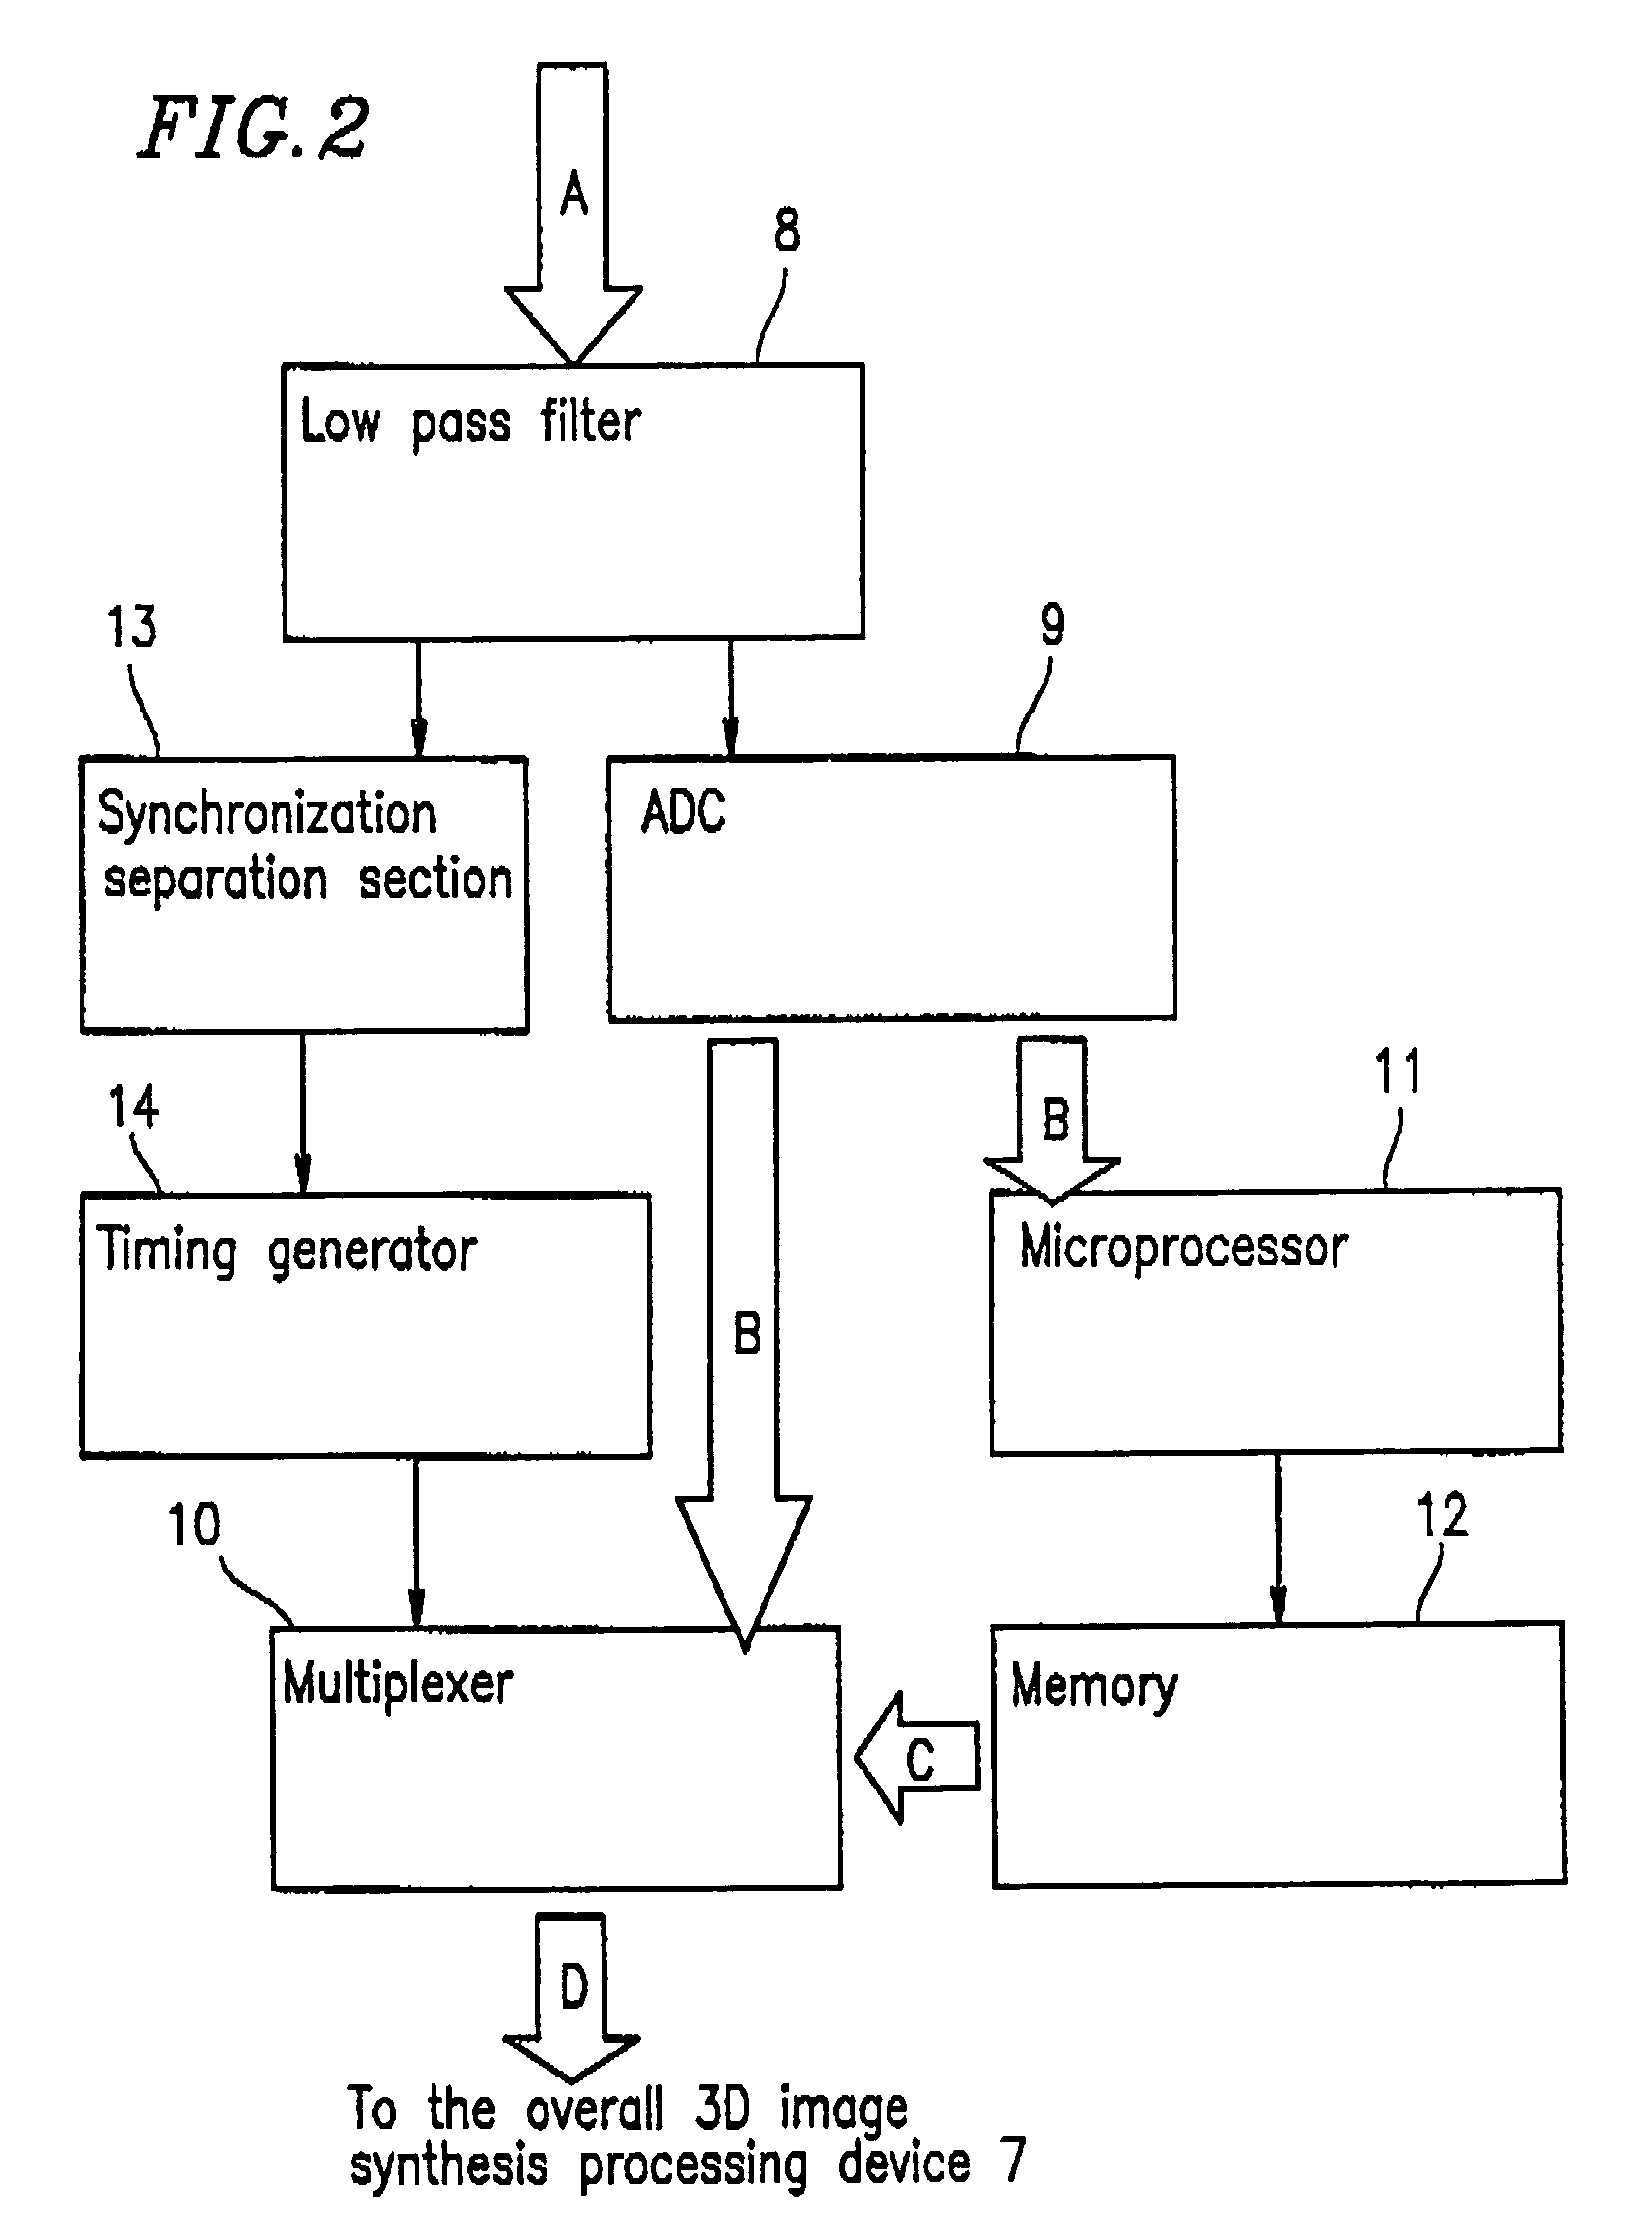 Image synthesis apparatus